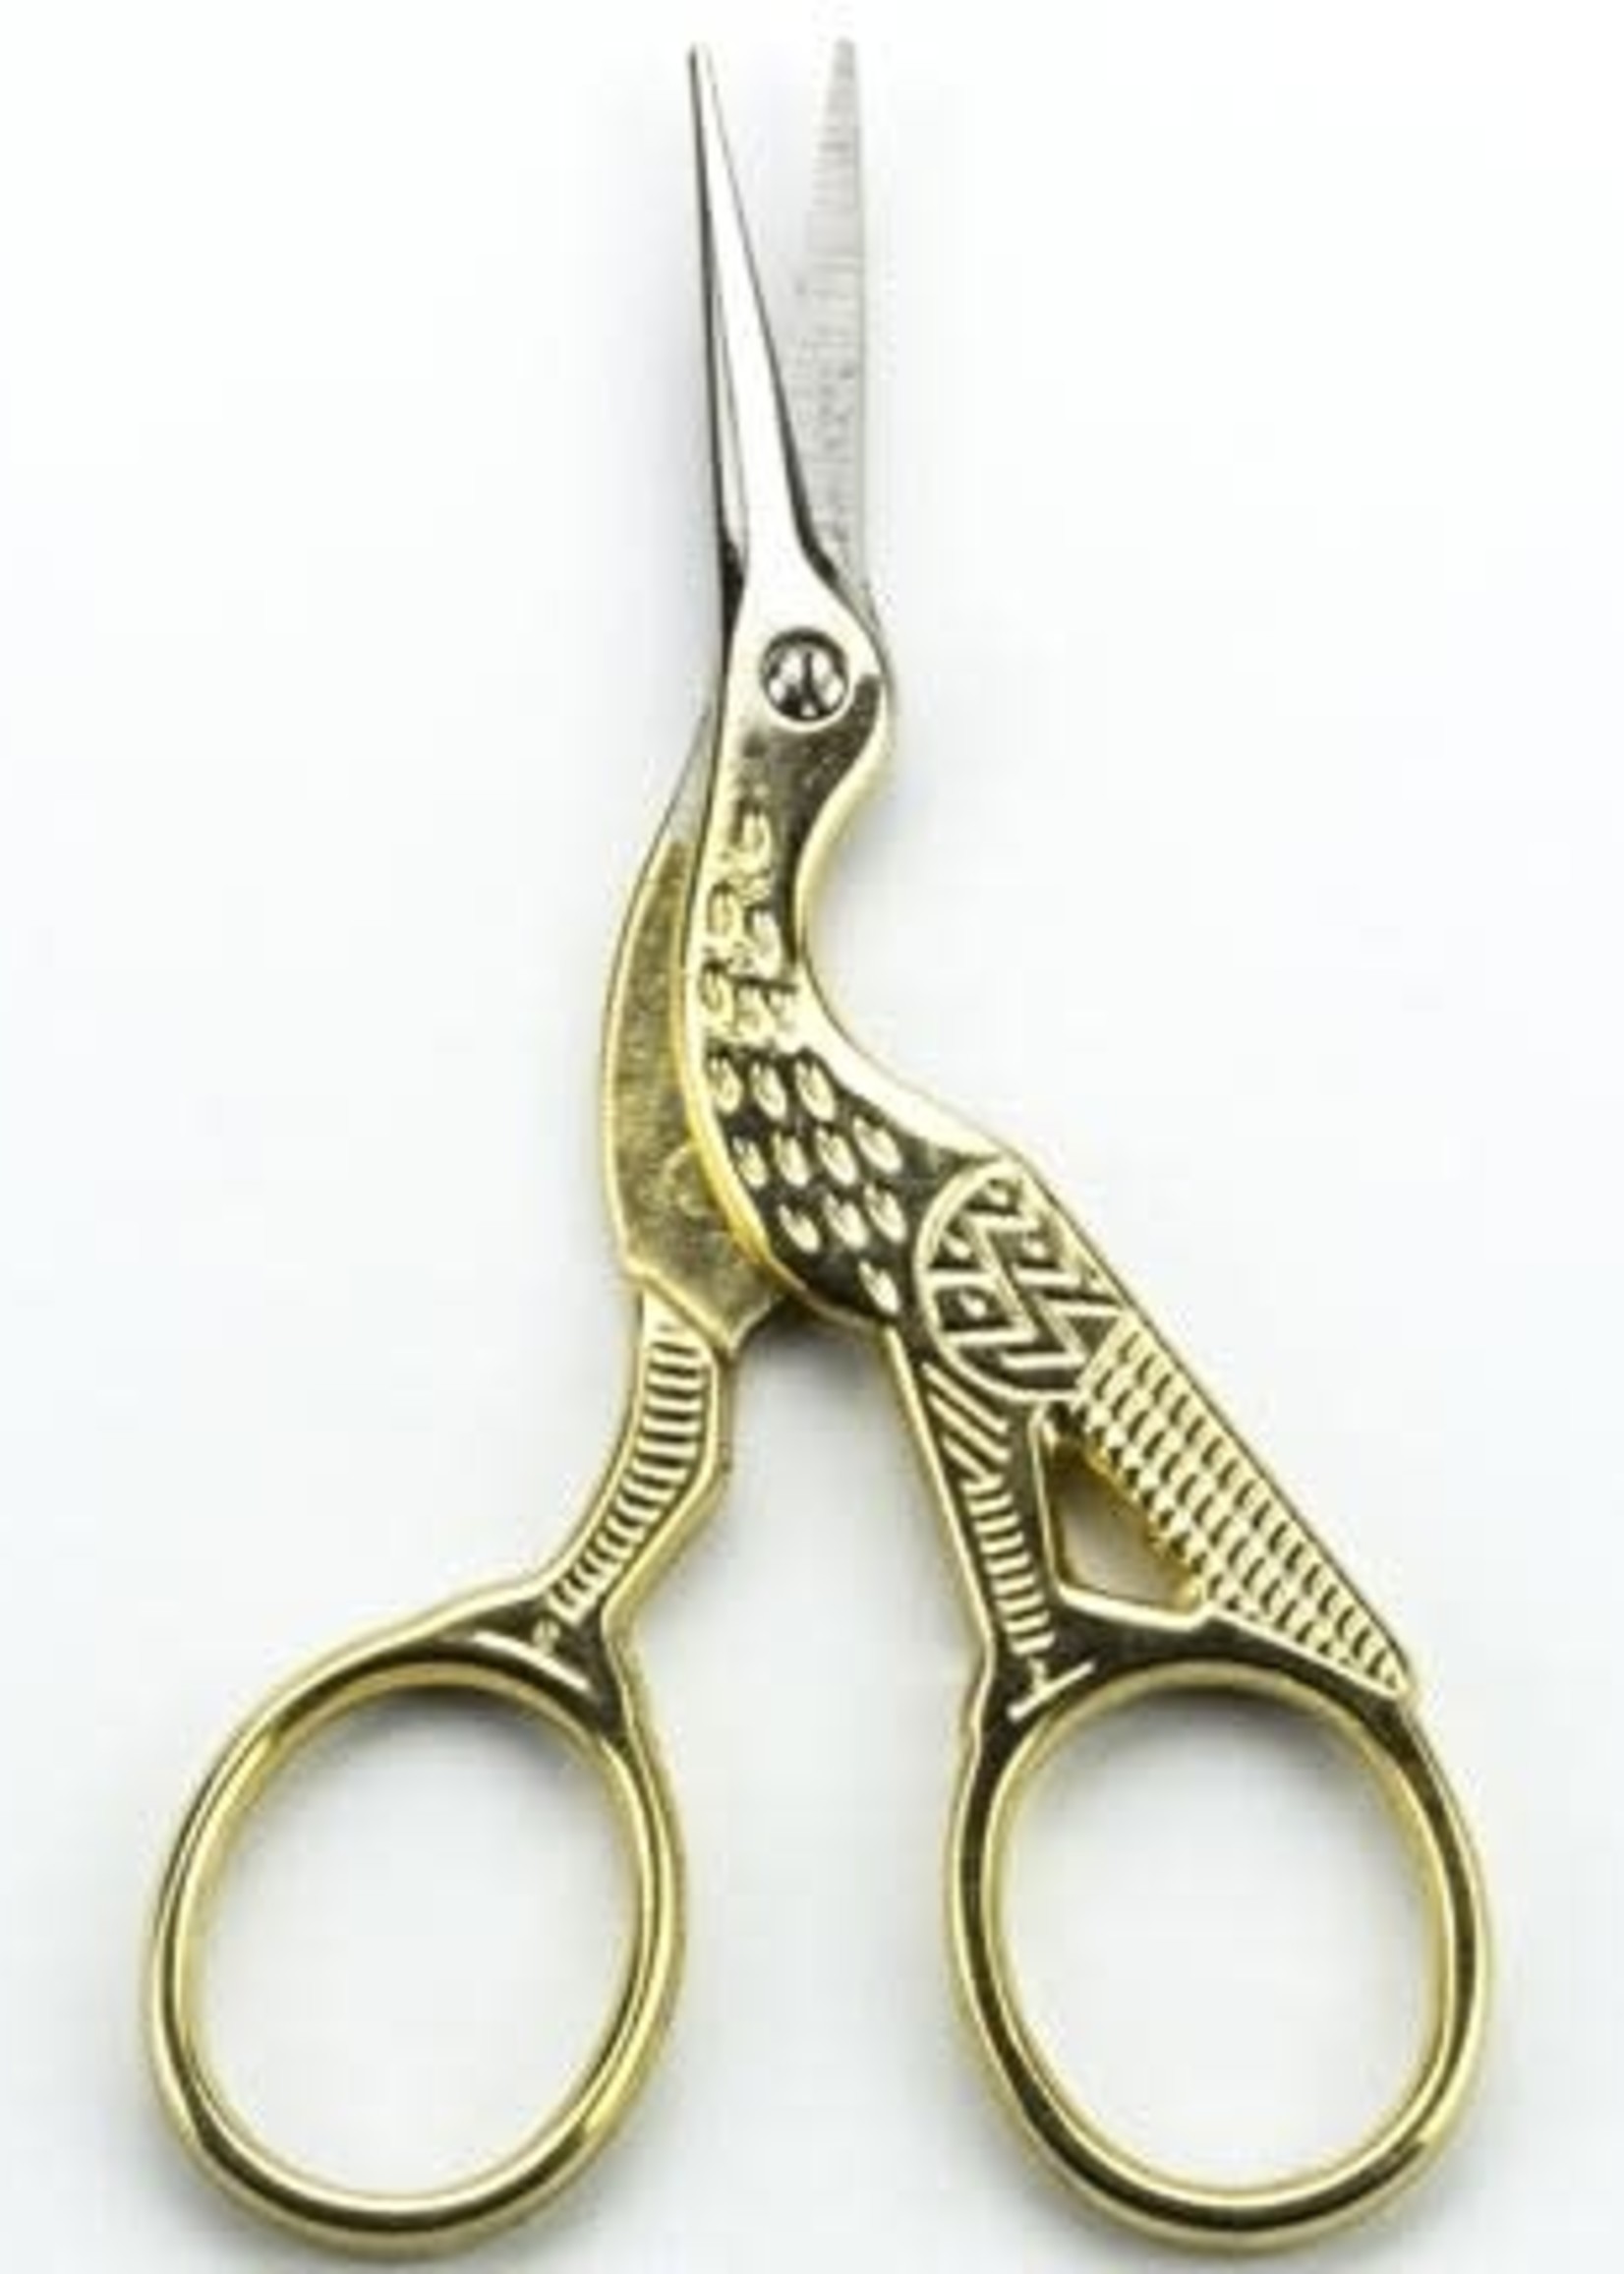 Hobby & Crafting Fun Stainless Steel Scissors with silver tip